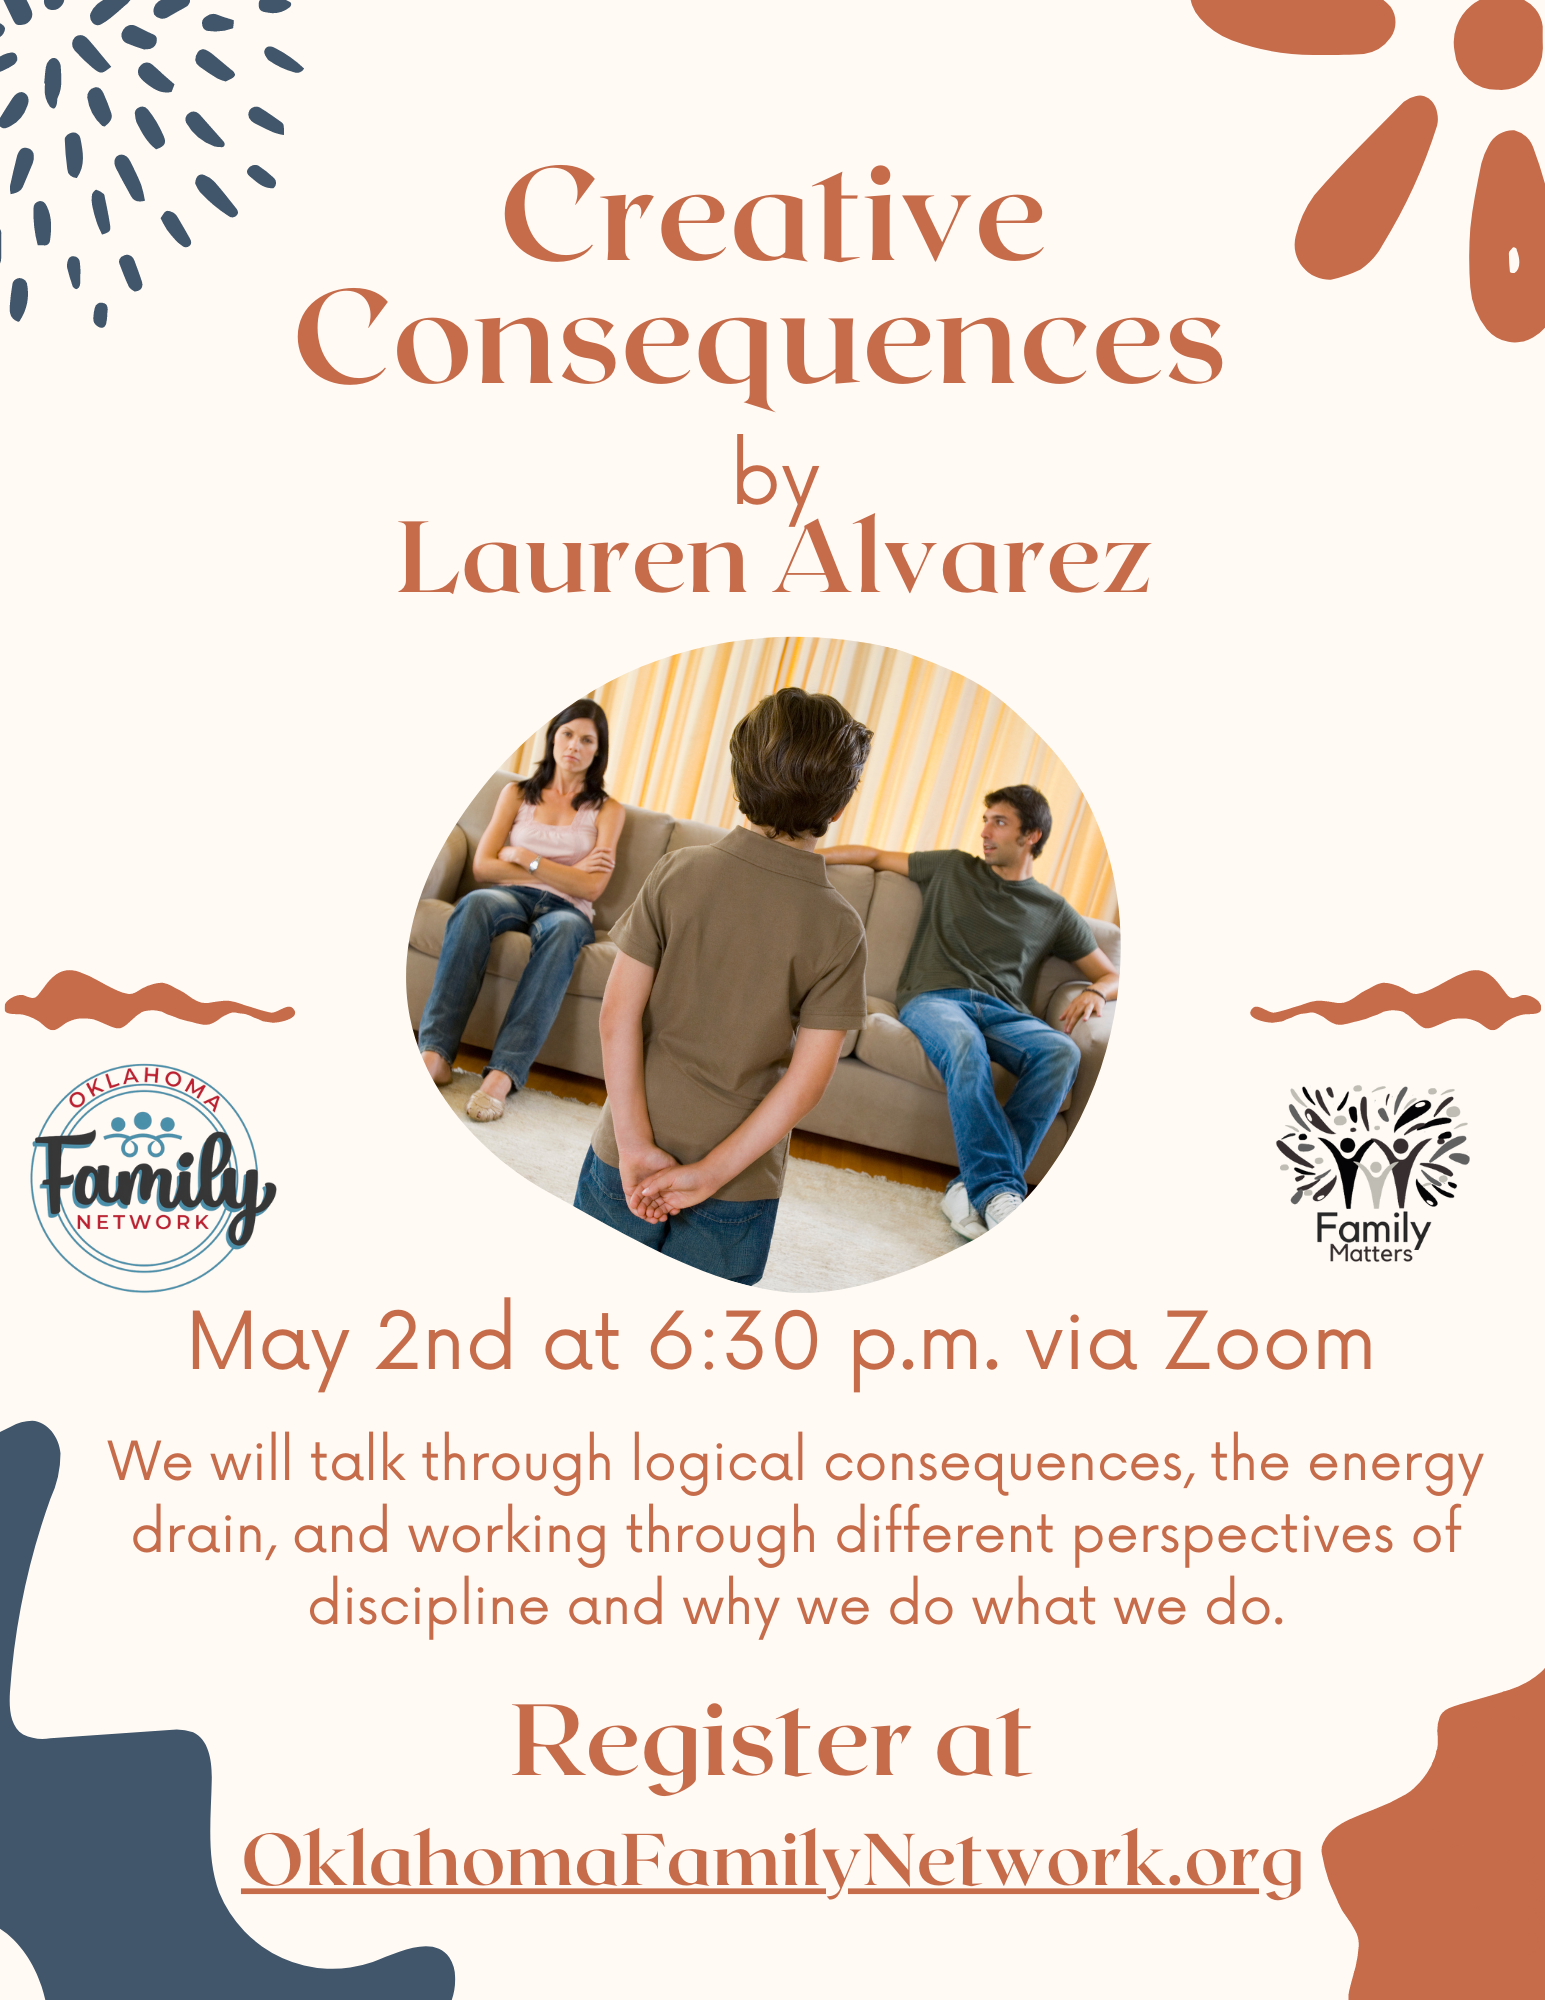 Creative Consequences by Lauren Alvarez on May 2nd at 6:30 via Zoom